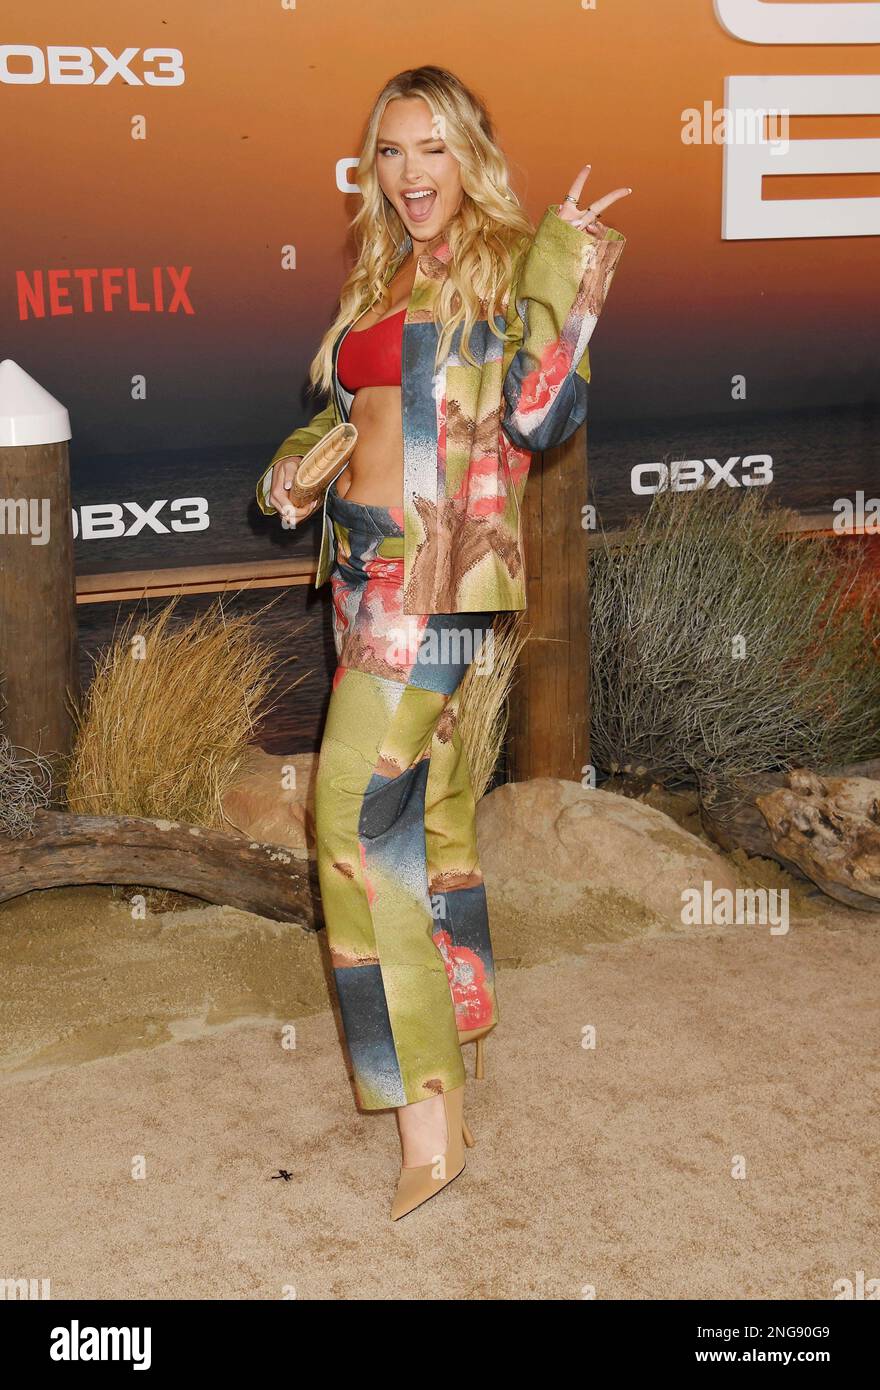 LOS ANGELES, CALIFORNIA - FEBRUARY 16: Camille Kostek attends the Los Angeles premiere of Netflix's 'Outer Banks at Regency Village Theatre on Februar Stock Photo